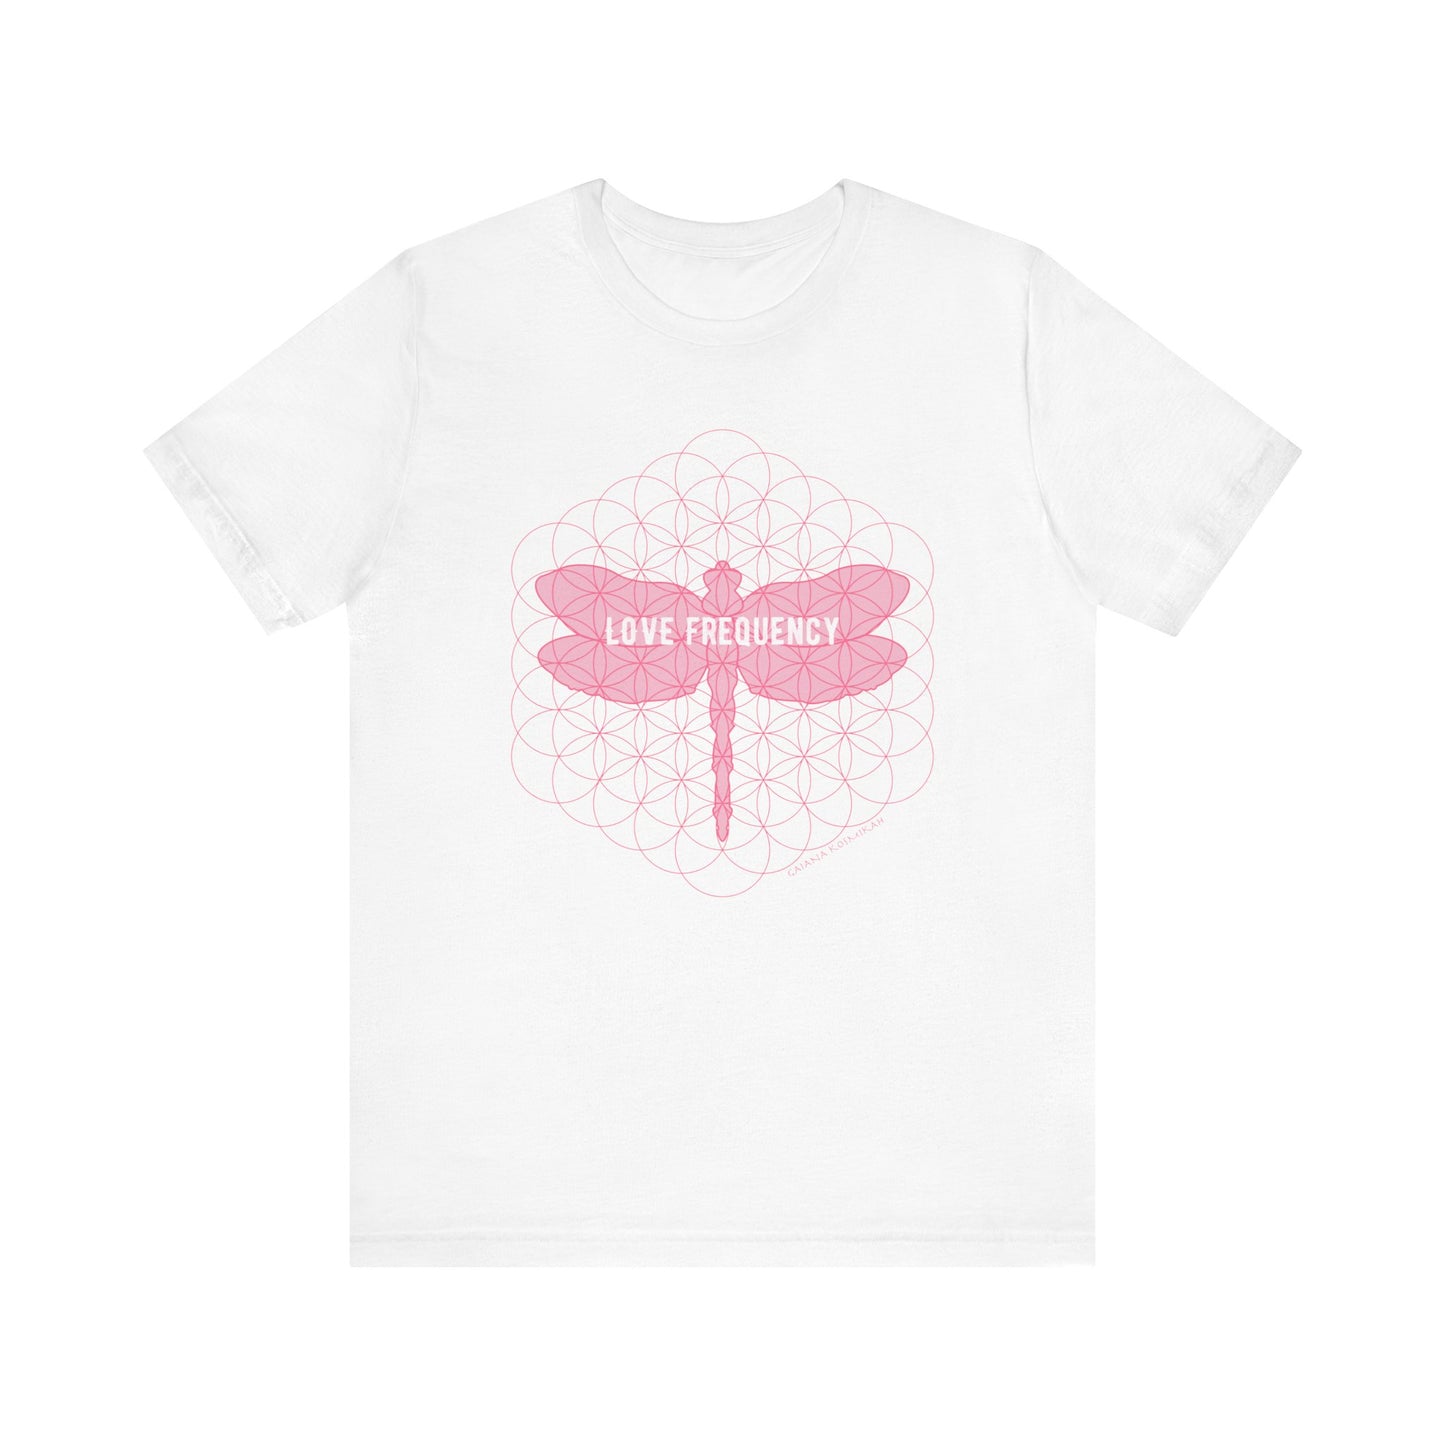 Love Frequency Dragonfly Unisex Jersey Short Sleeve Tee | Love Dragonfly Flower of Life Shirt | Love Dragonfly Sacred Geometry T-Shirt